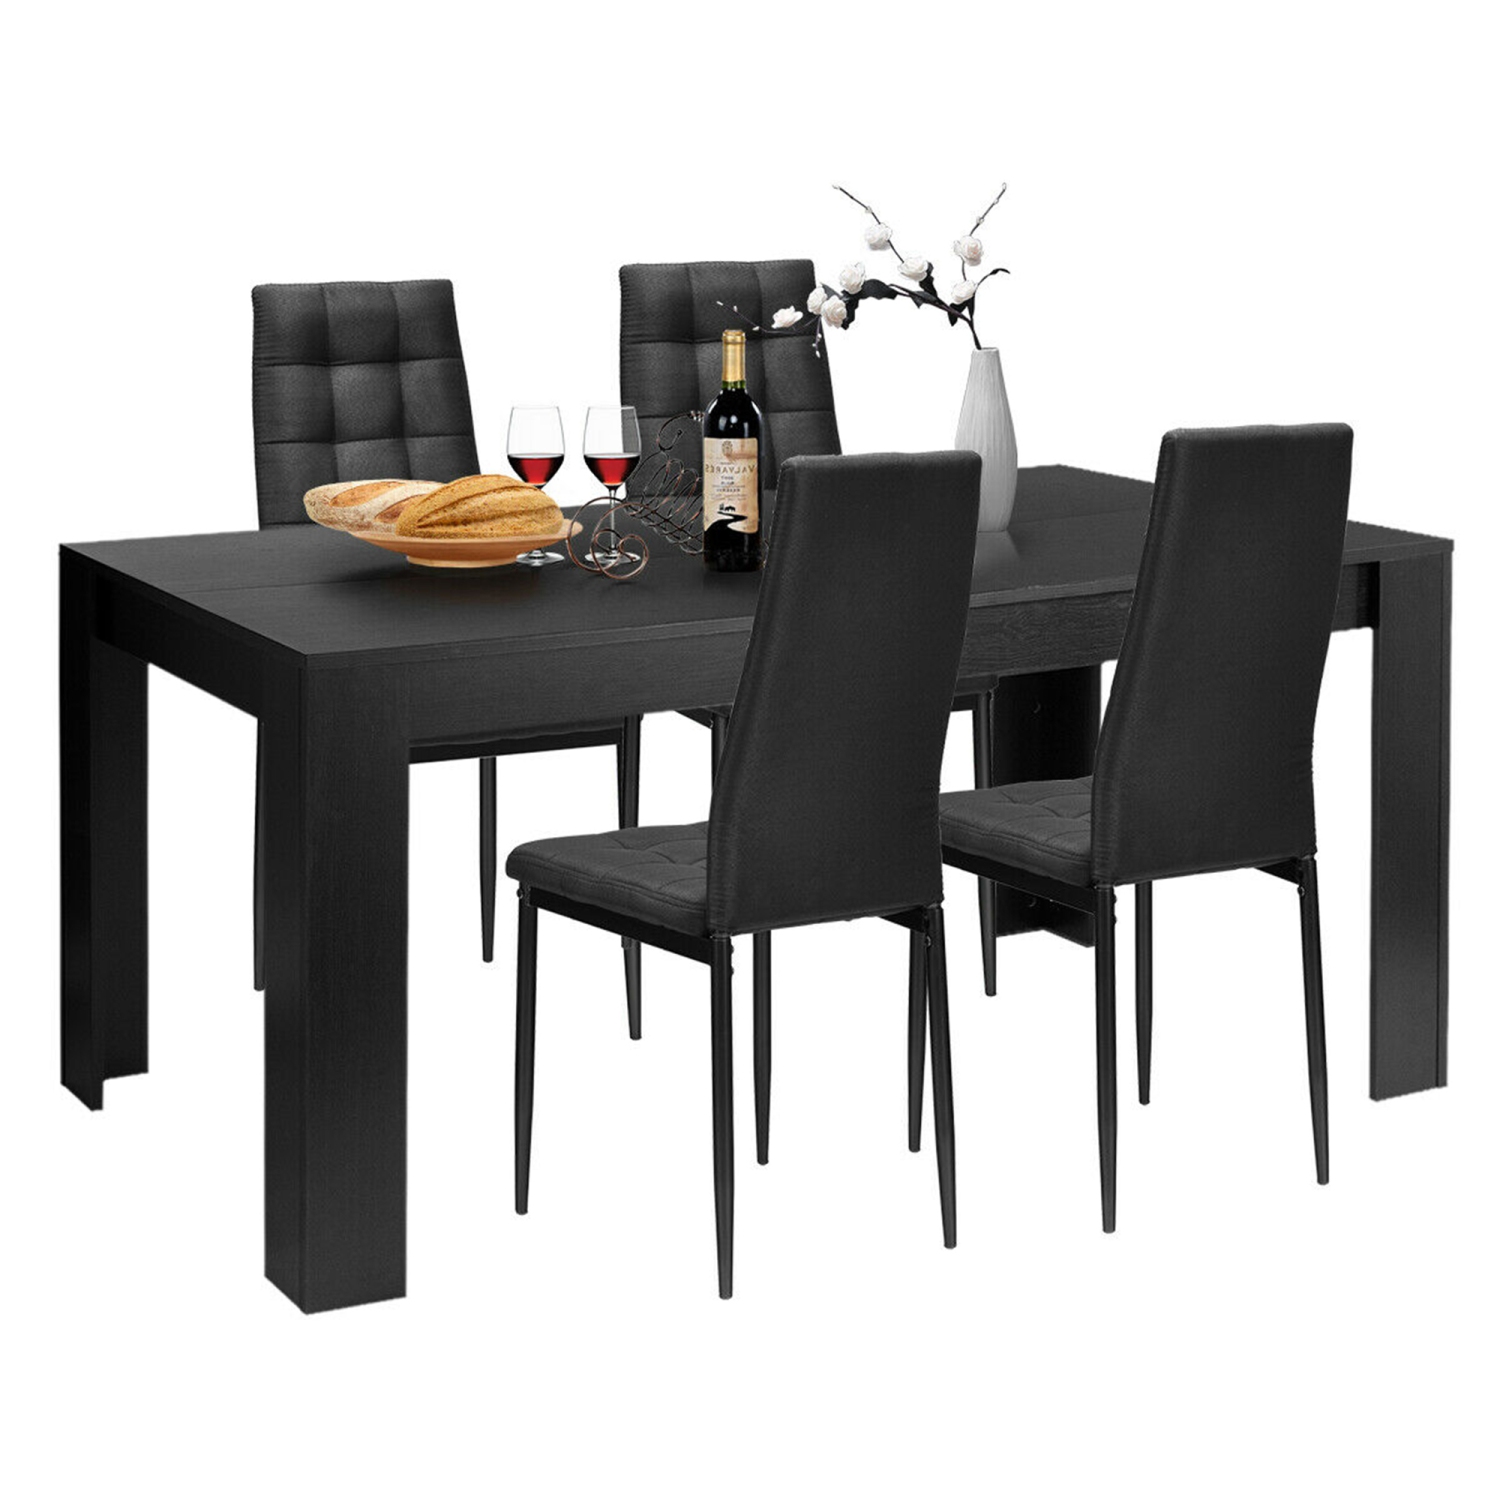 Gymax 5pcs Dining Set Wood Table and 4 Fabric Chairs Home Kitchen Modern